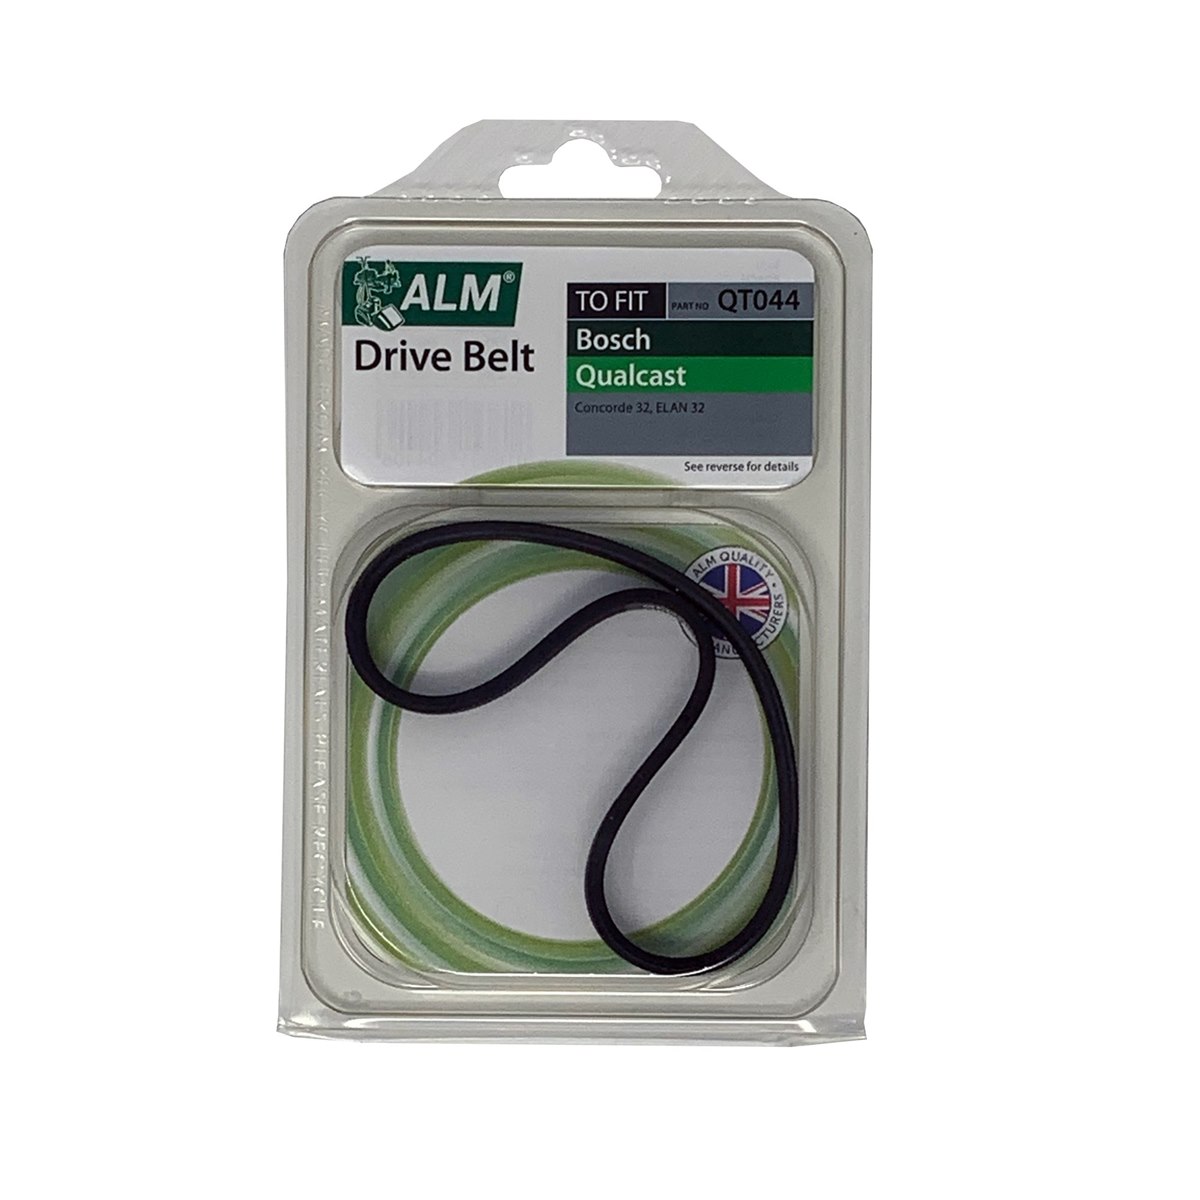 ALM QT044 Drive Belt to Fit Bosch and Qualcast Lawnmowers